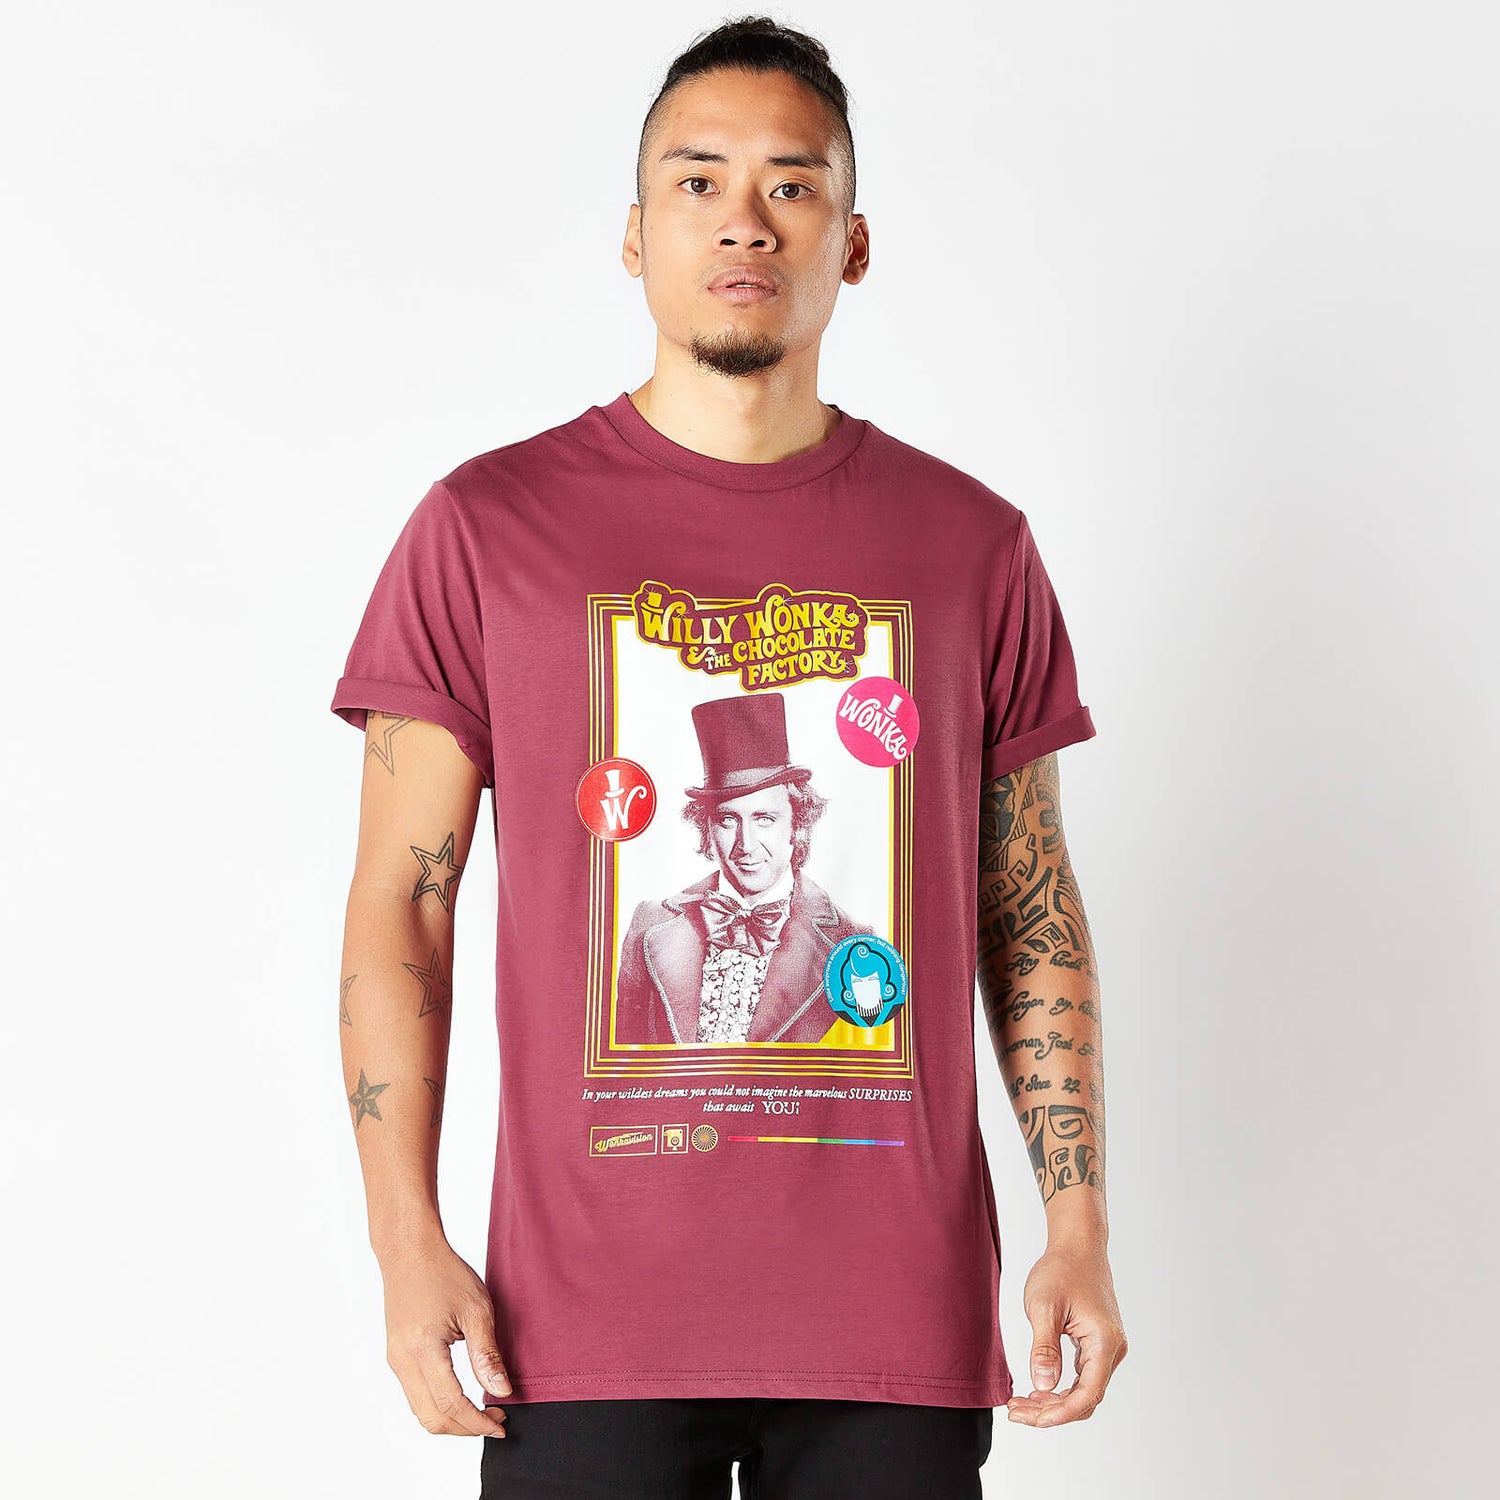 Willy Wonka & The Chocolate Factory Retro Cover Men's T-Shirt - Bordeaux